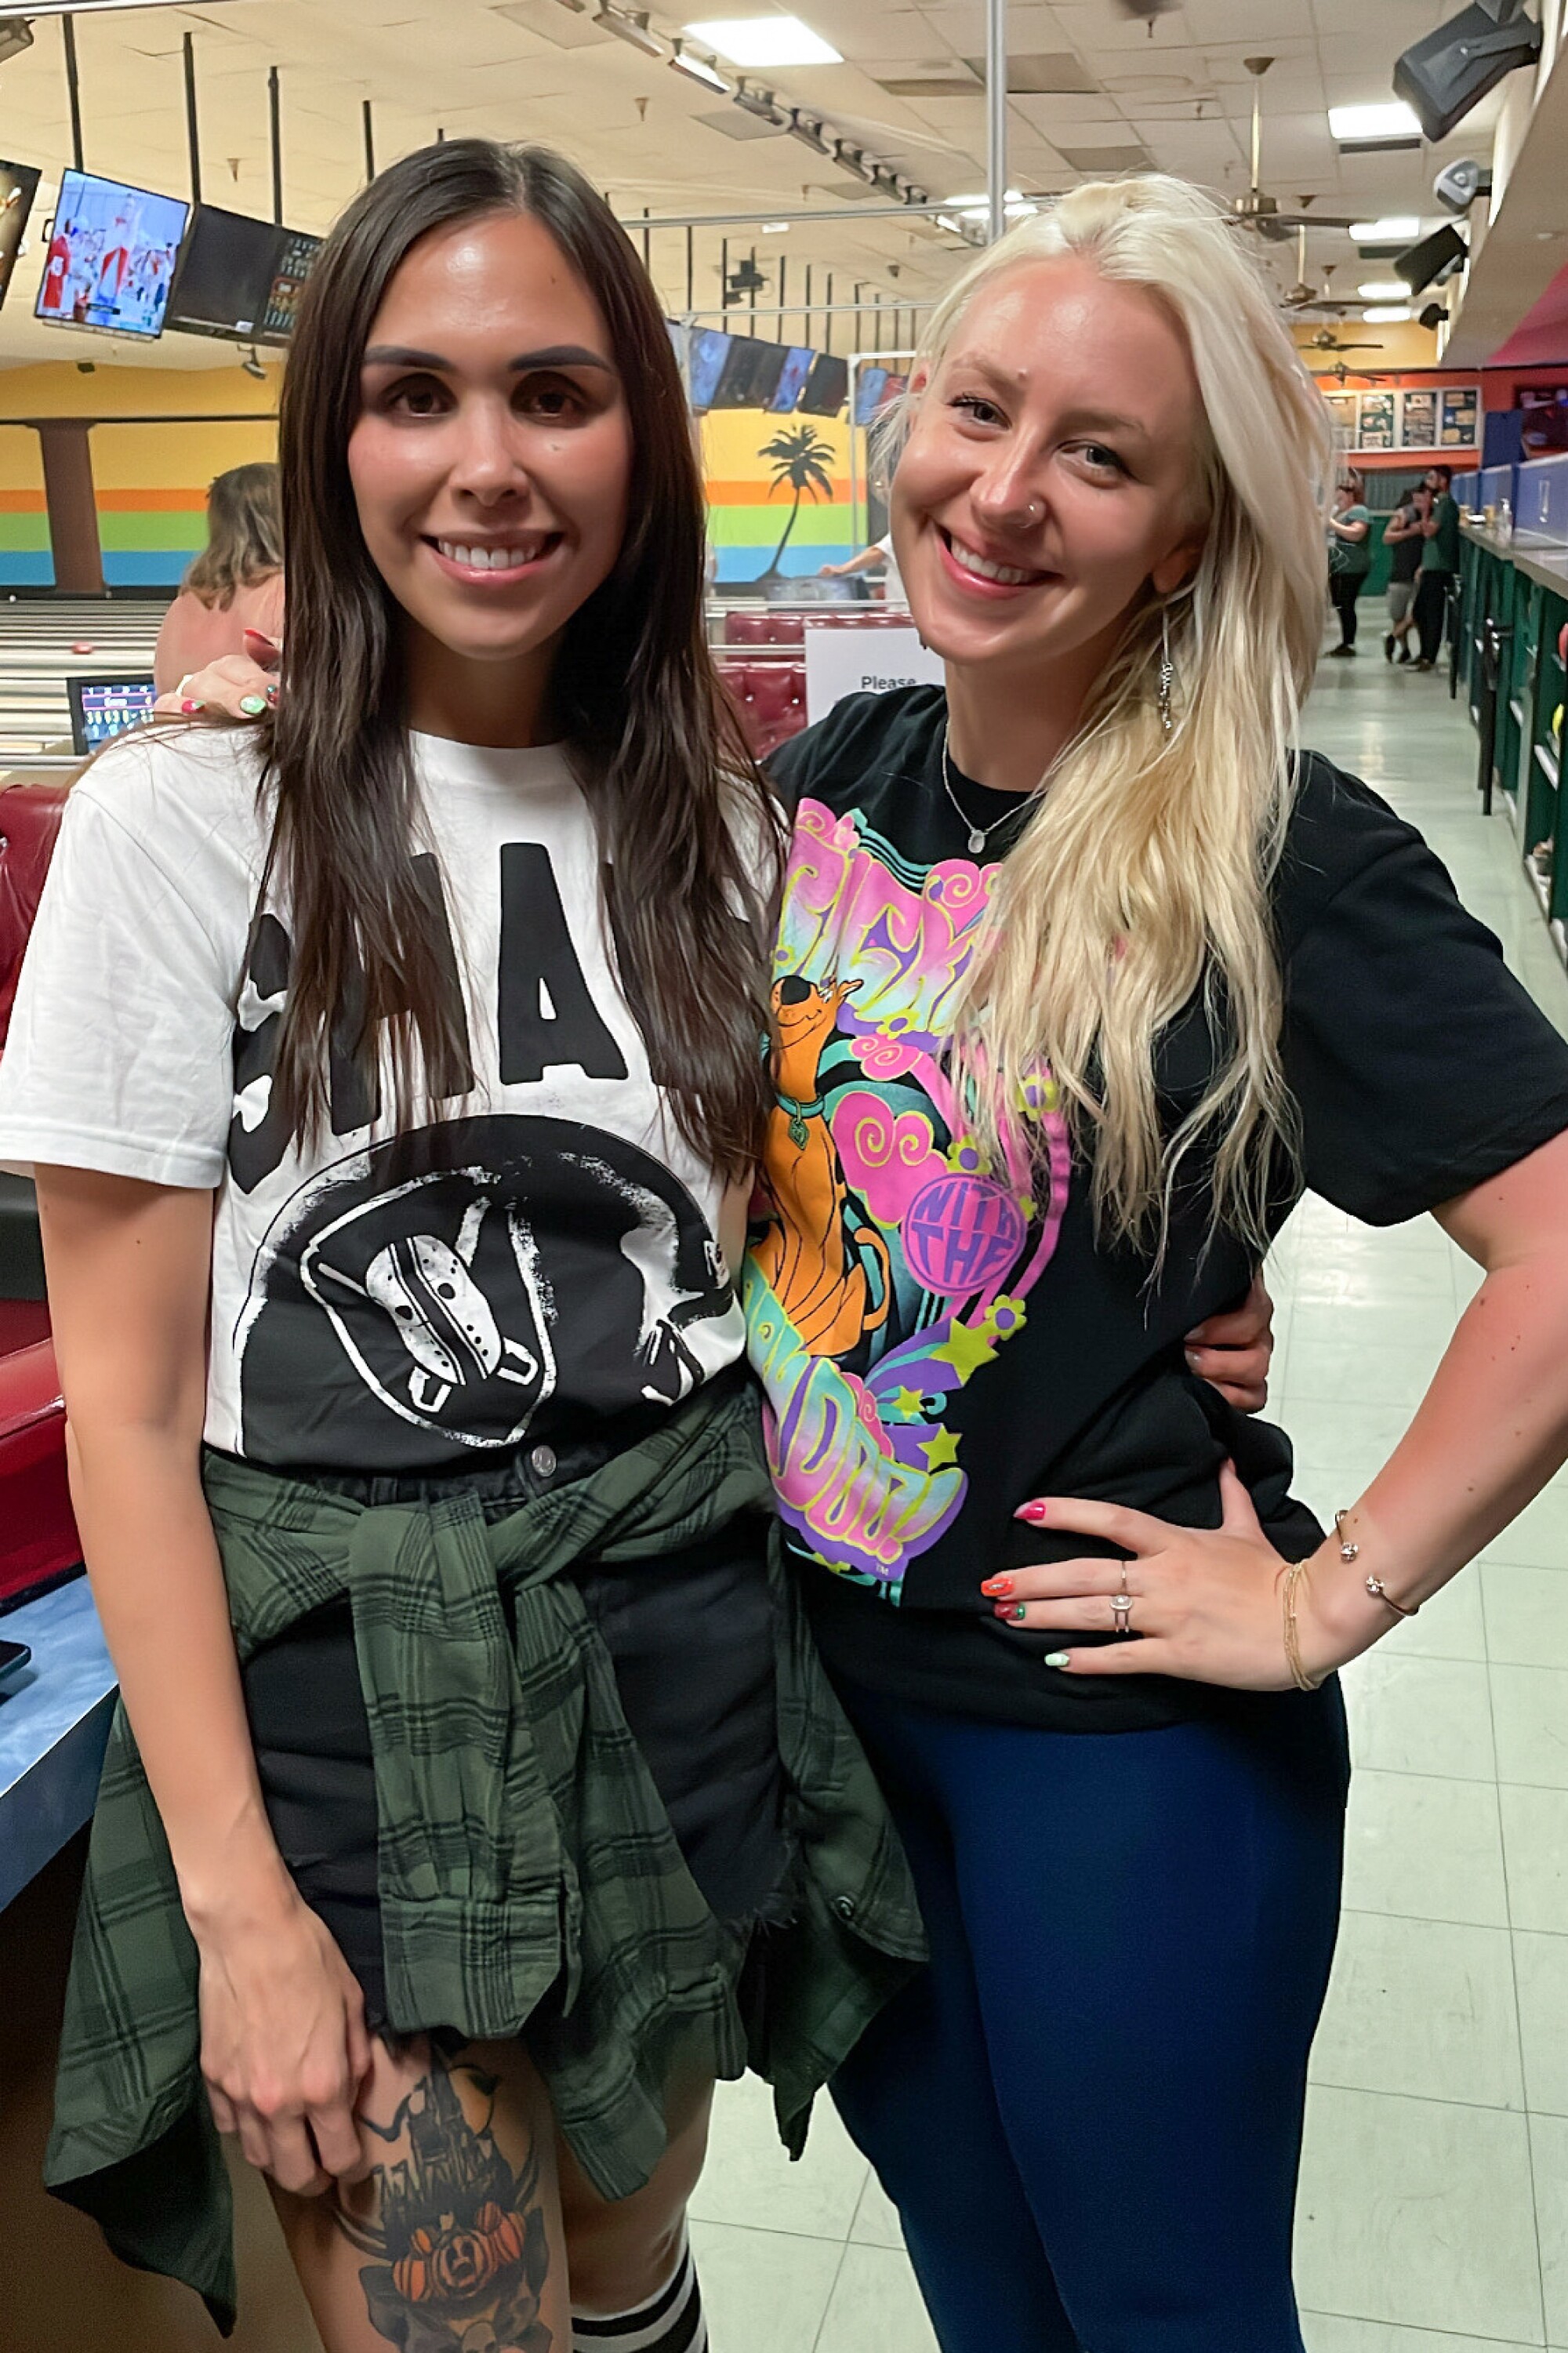 Two women at a bowling alley.